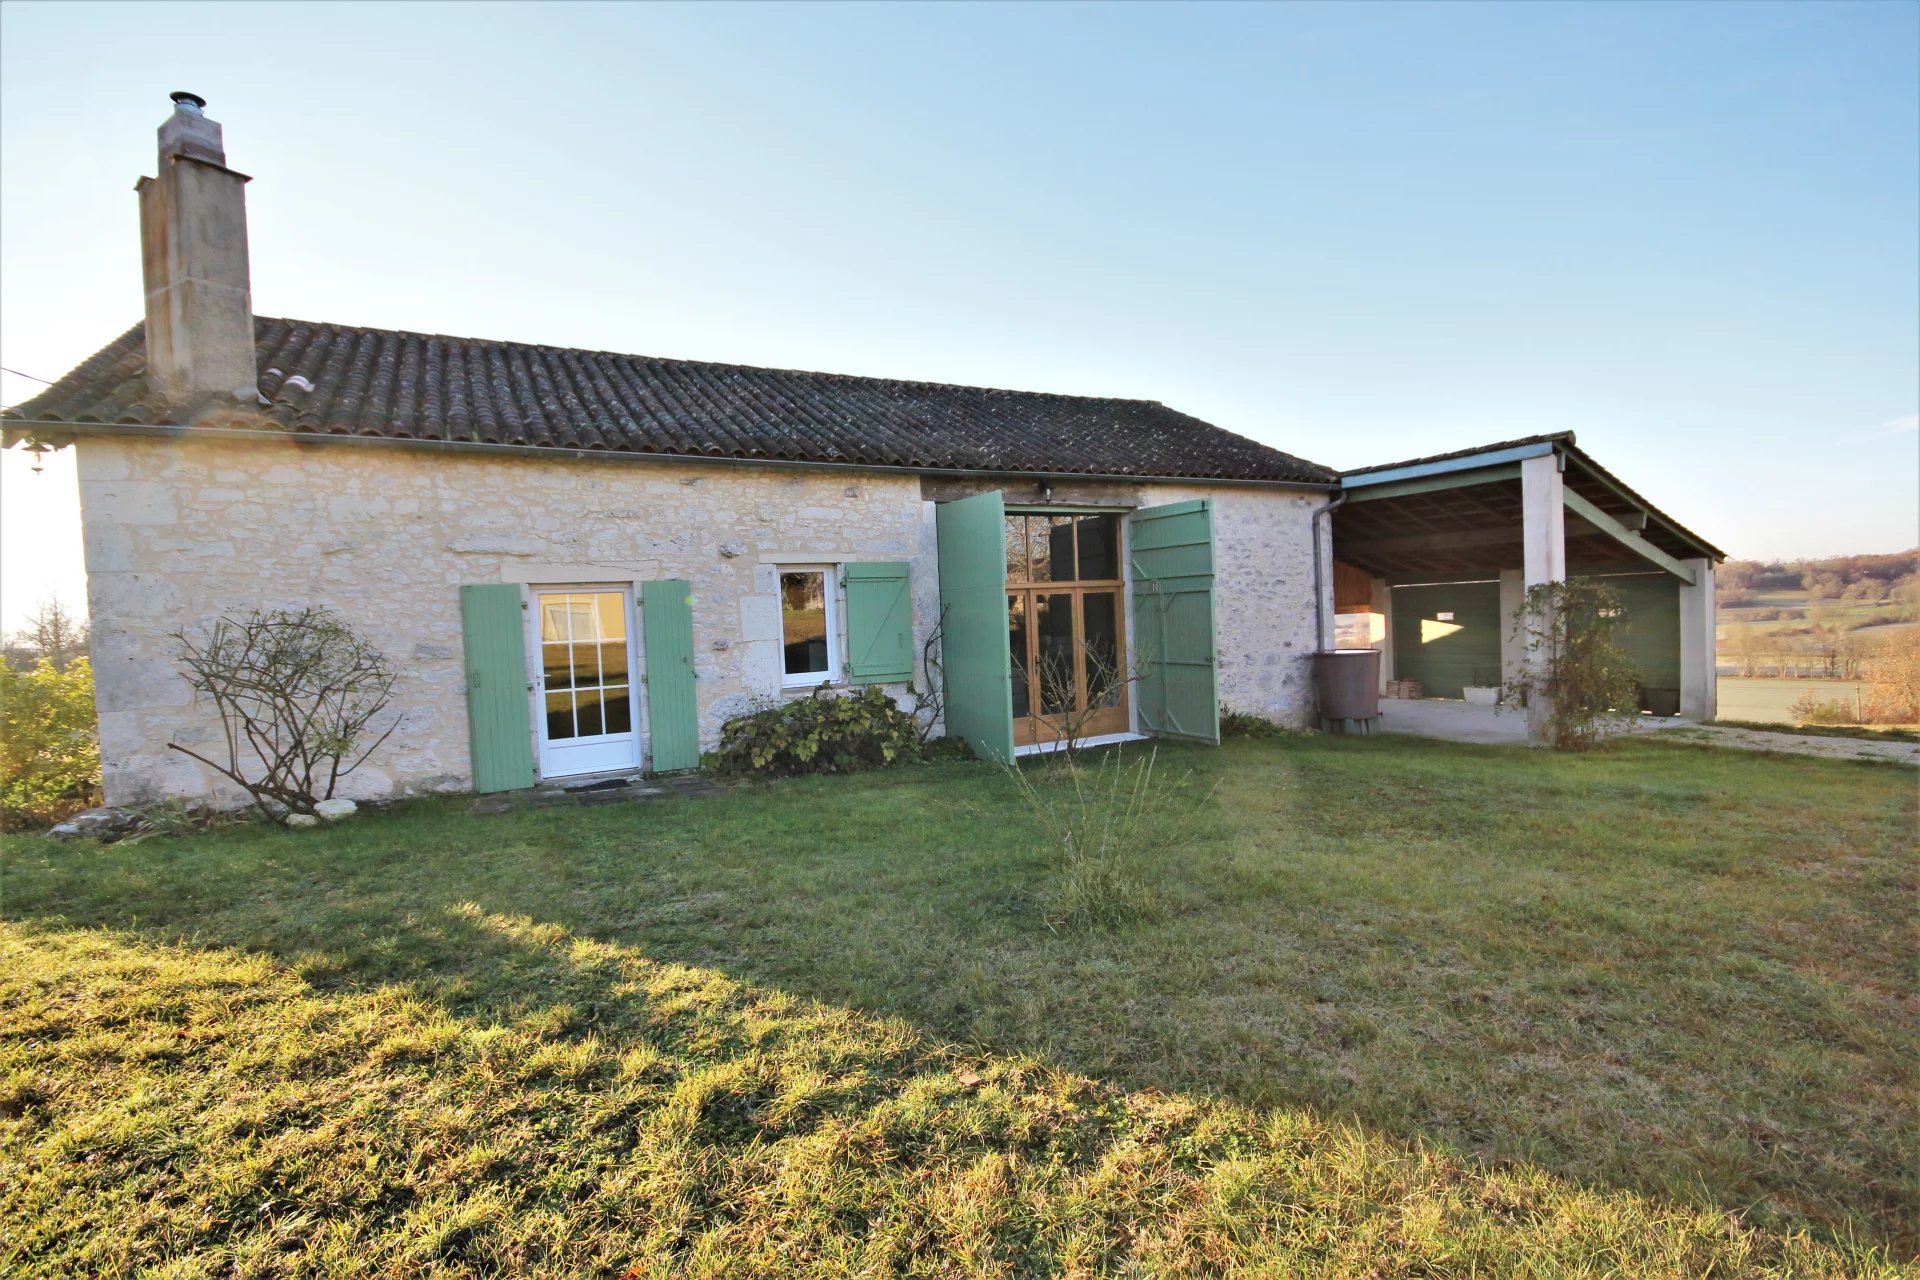 Stone country house with 2 beds and attached workshop